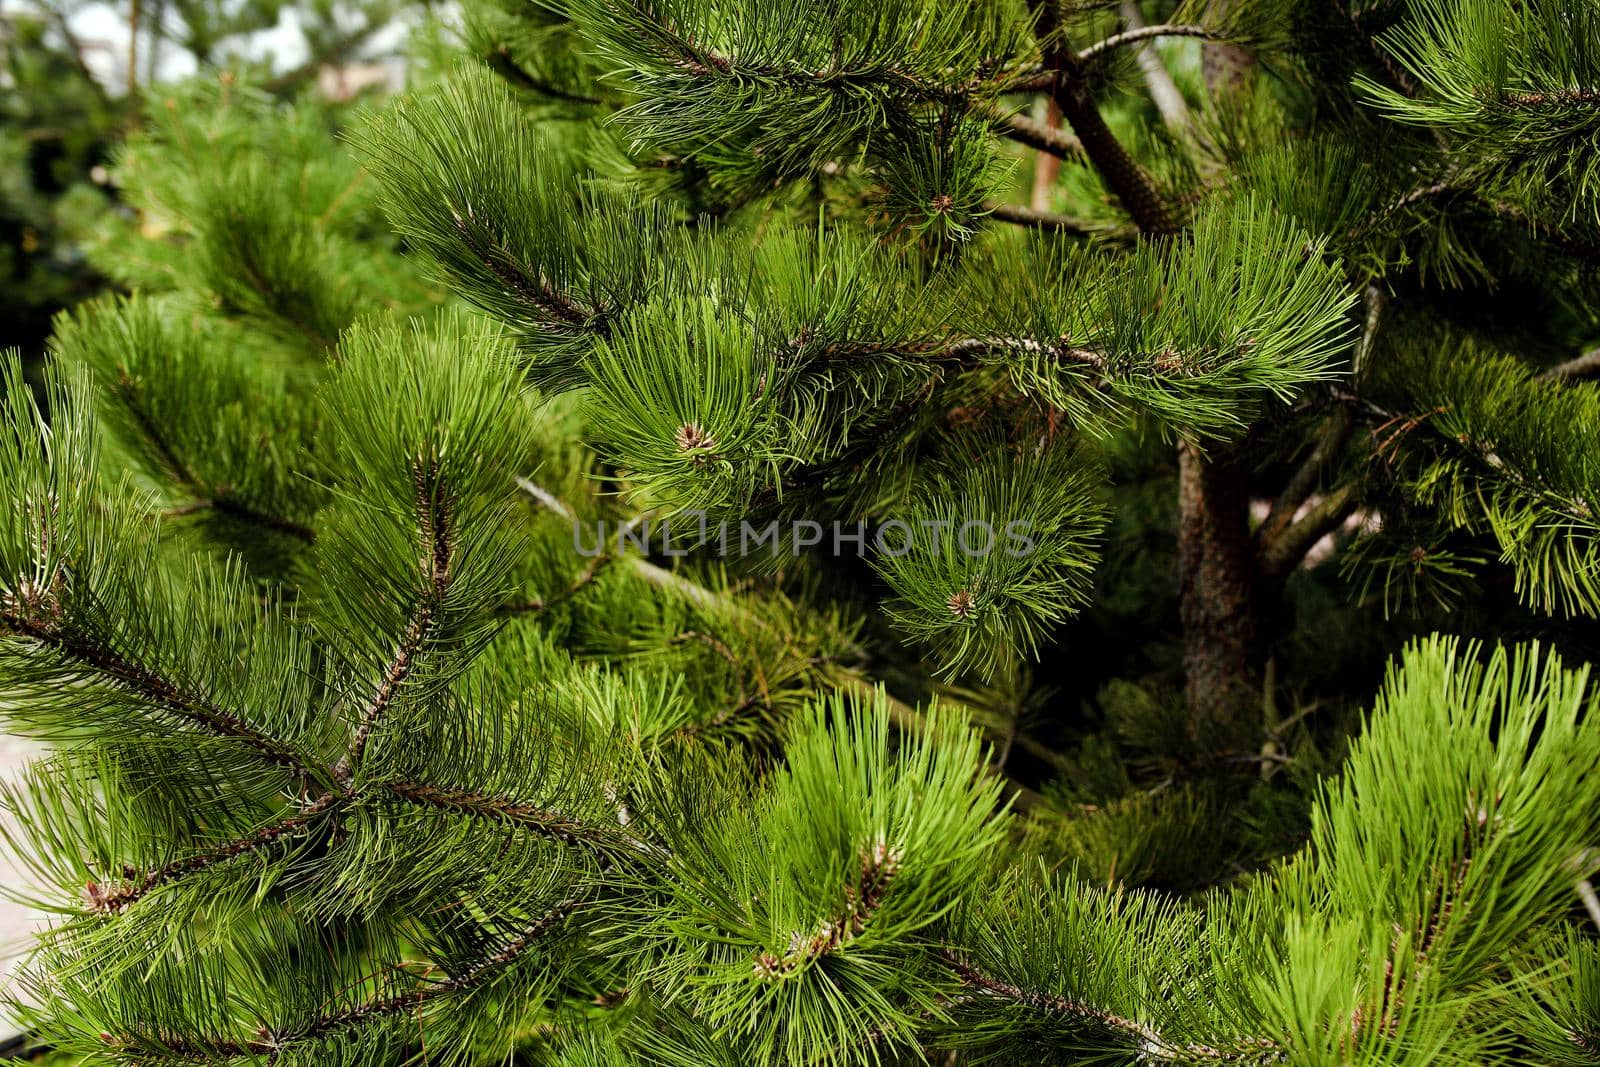 Green Pointy Pine Needles Close Up